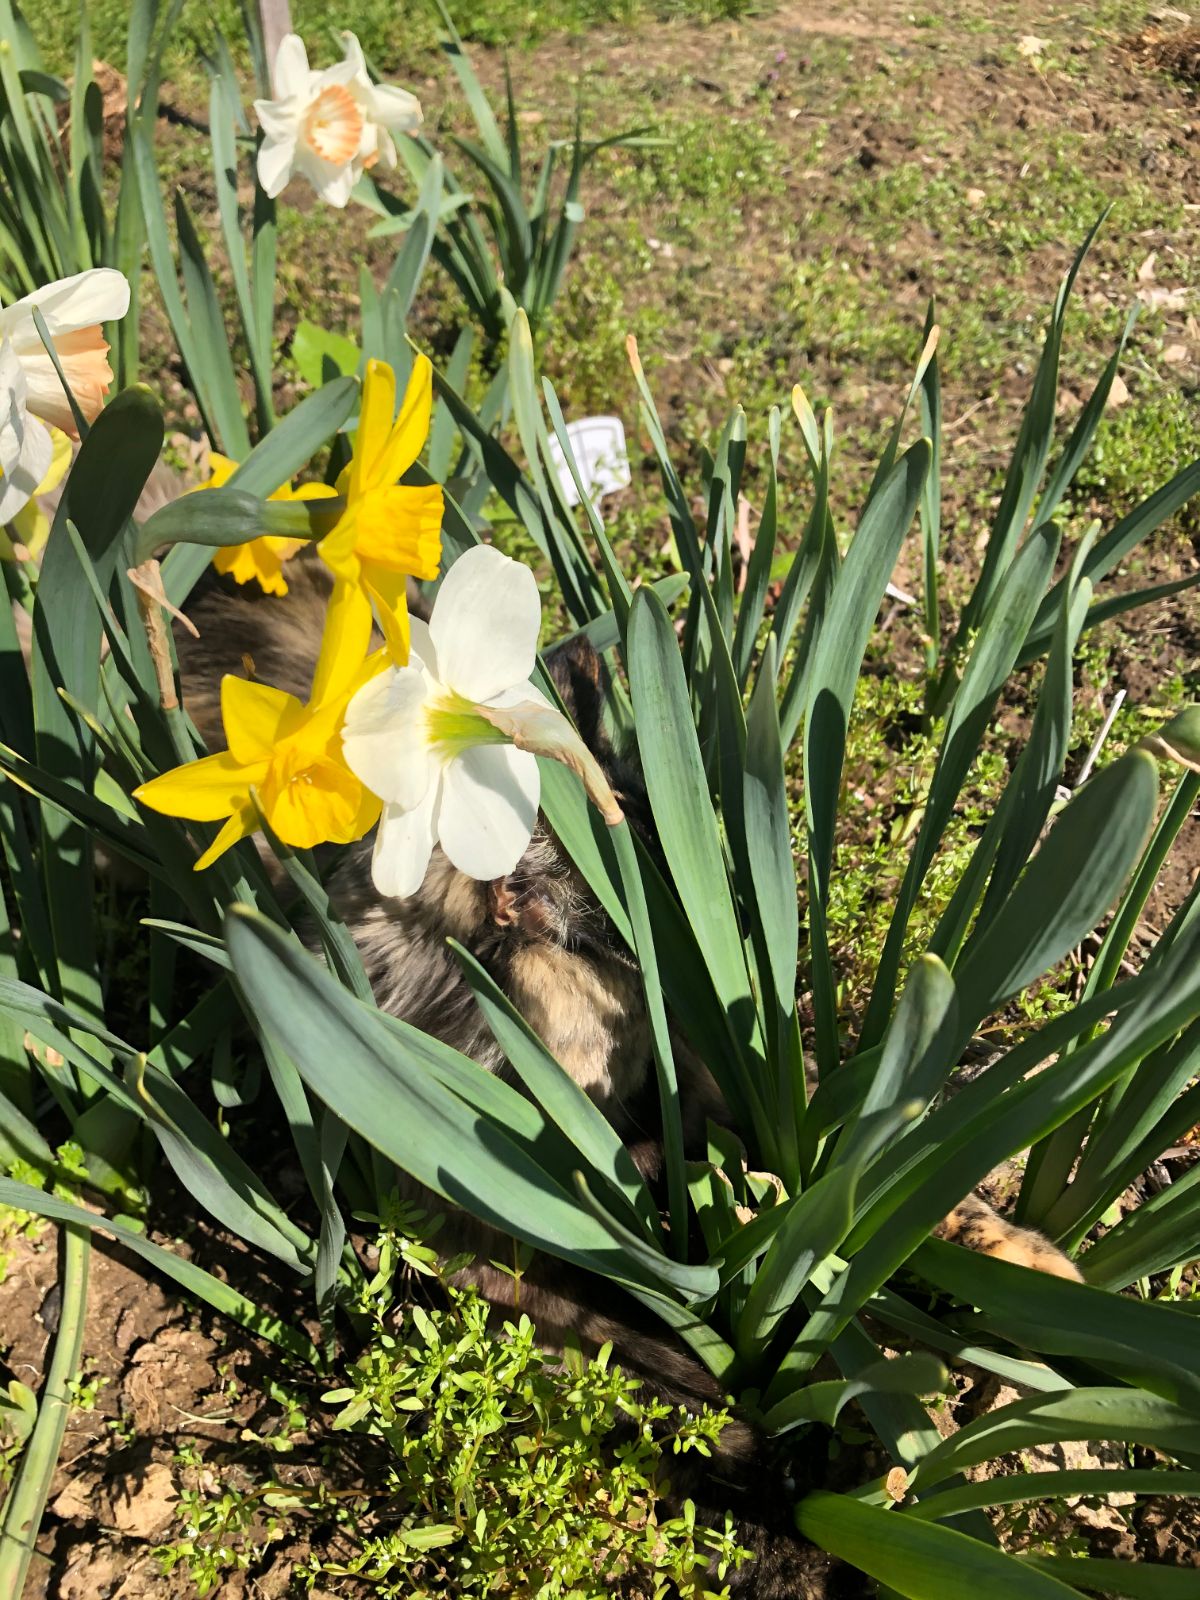 A kitty hiding in new spring daffodils